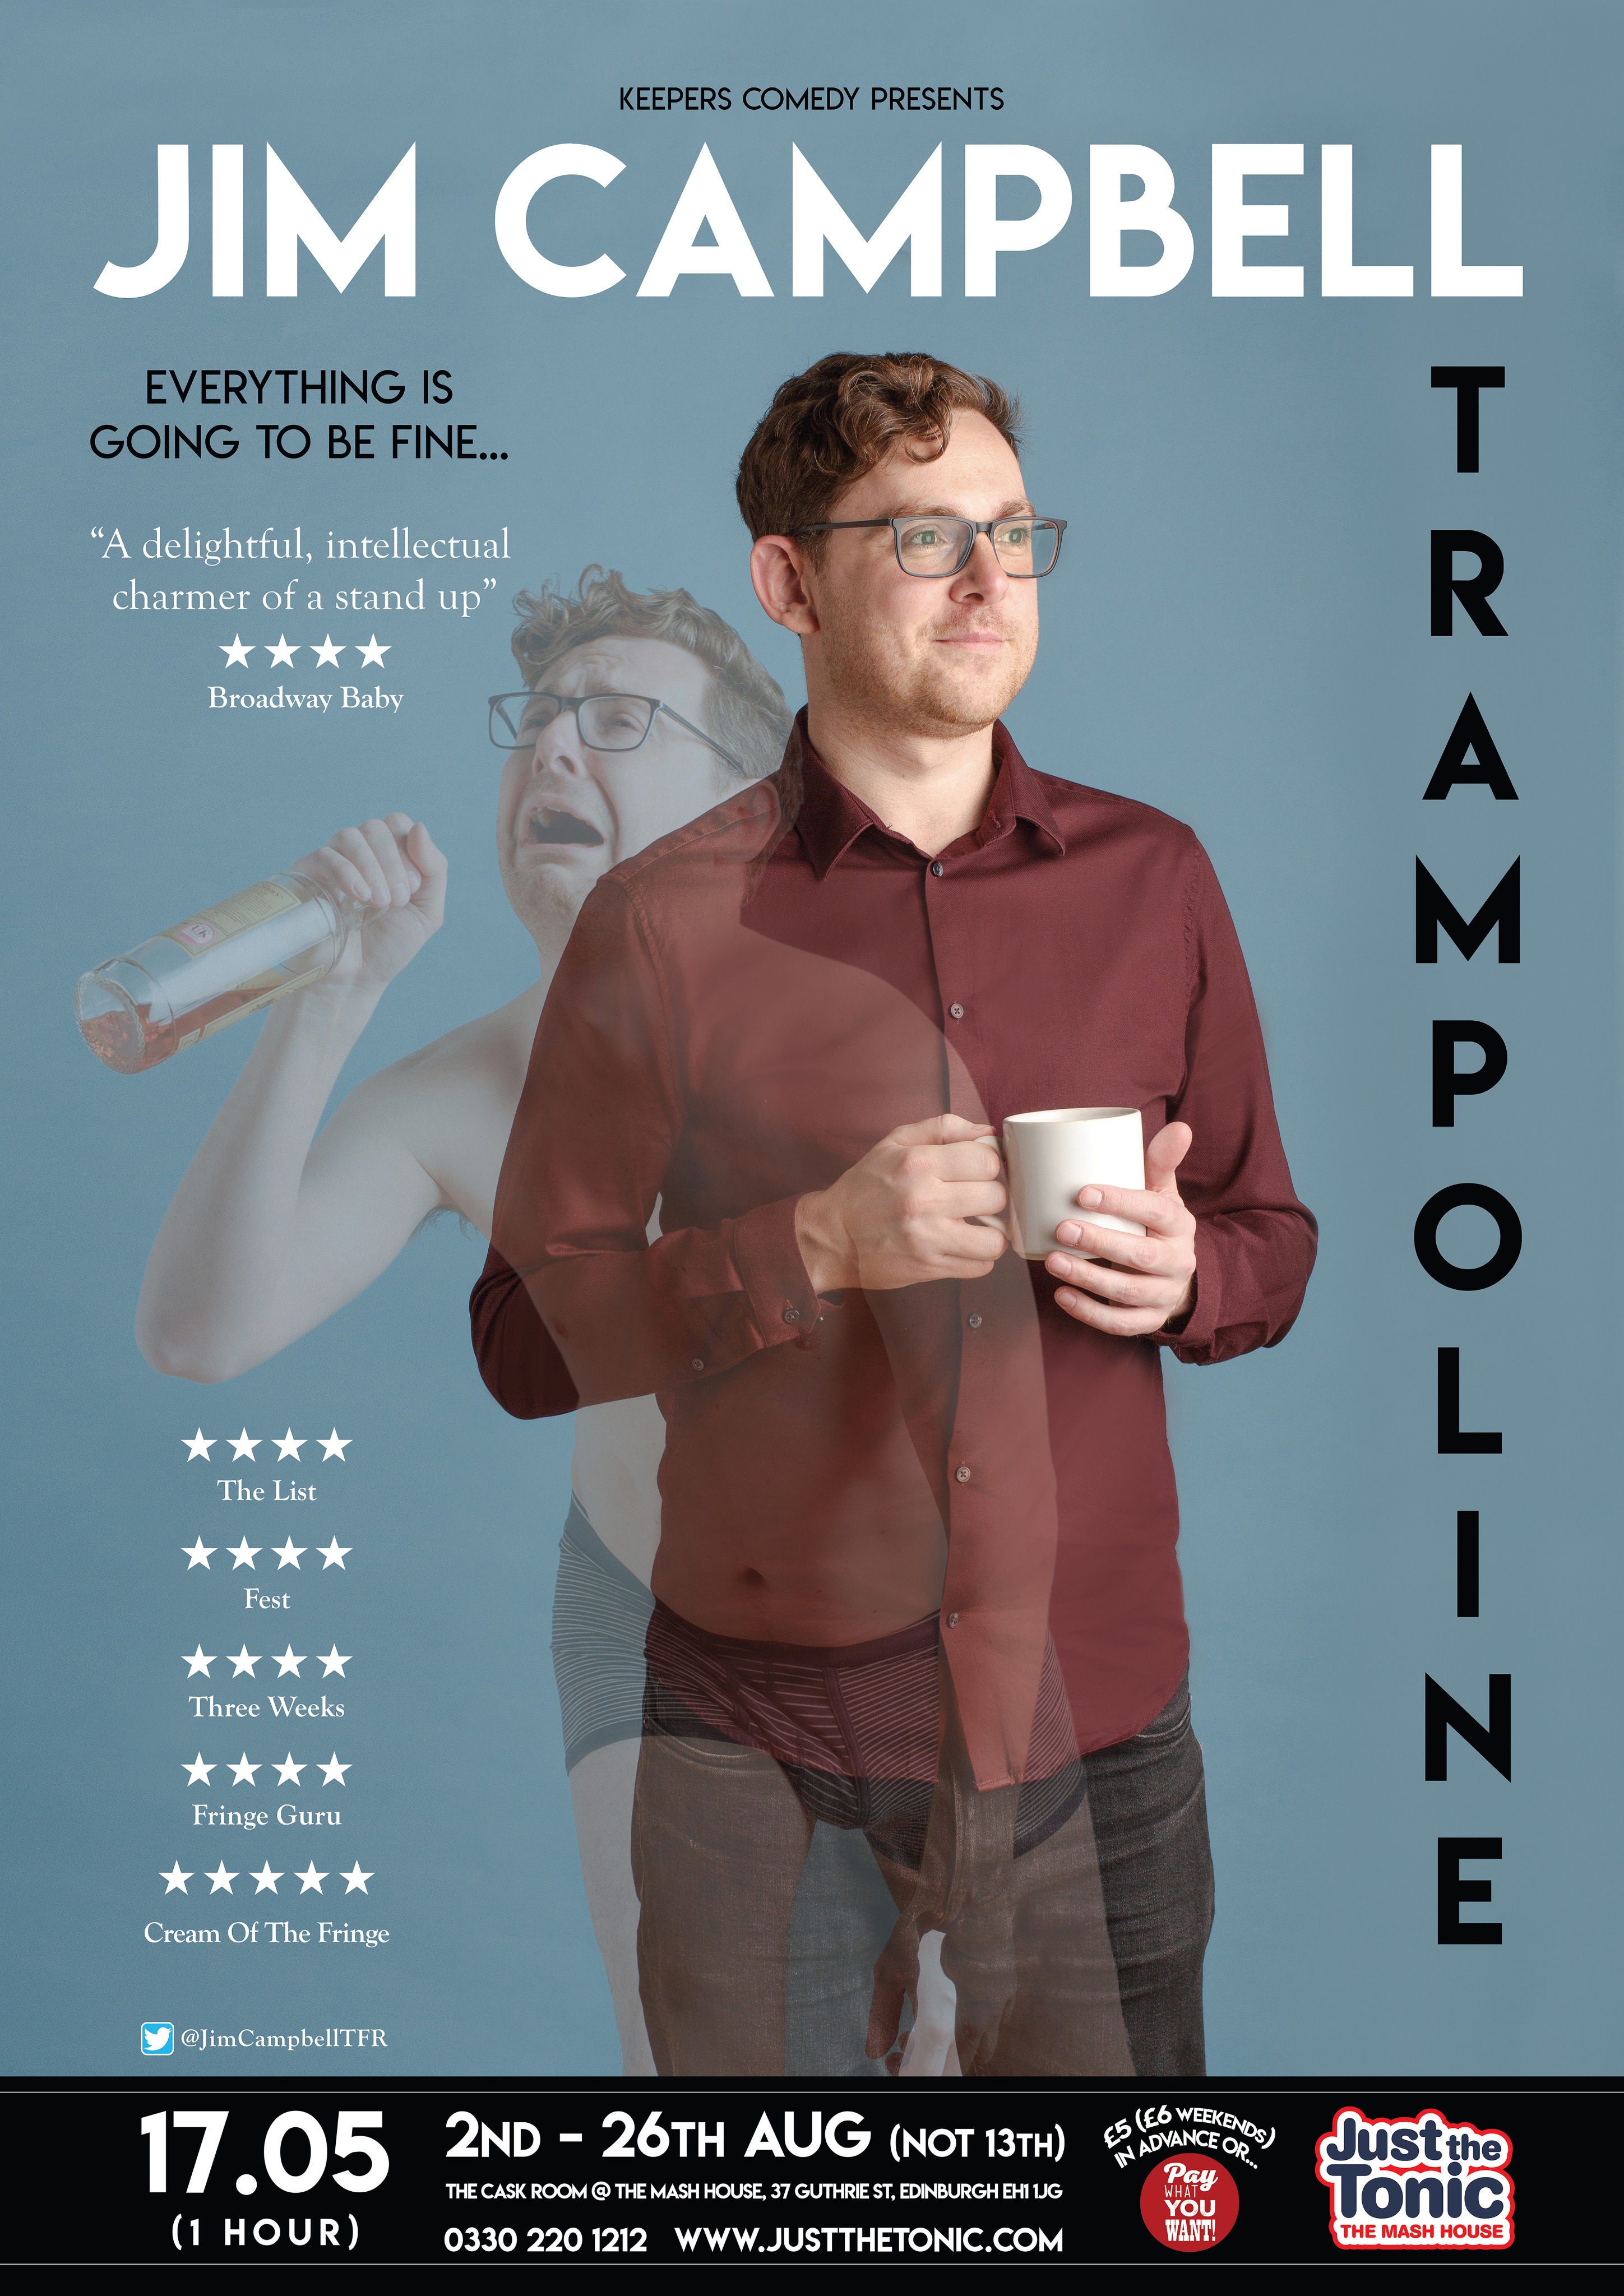 The poster for Jim Campbell: Trampoline